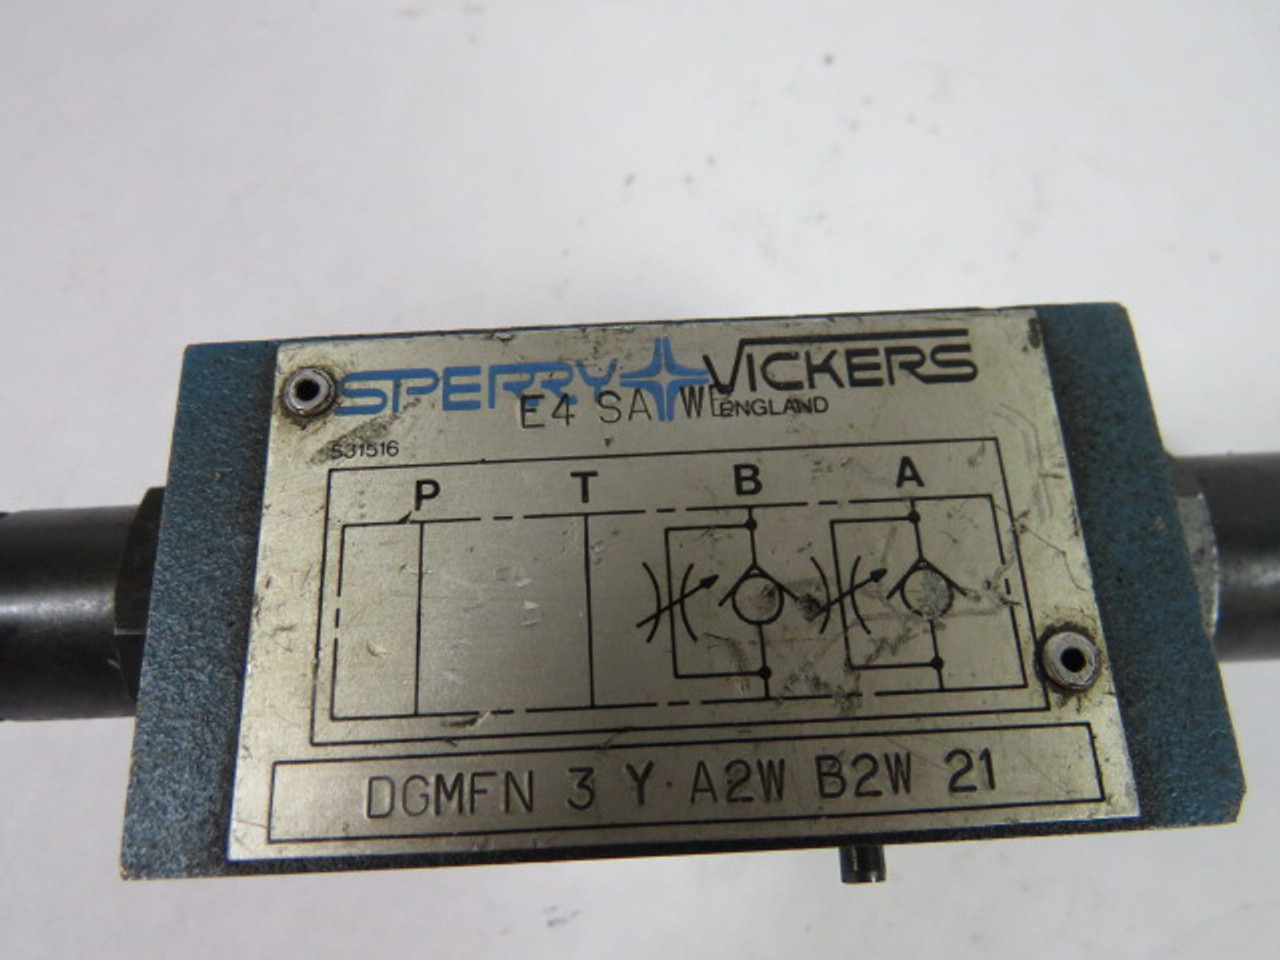 Sperry-Vickers DGMFN-3-Y-A2W-B2W-21 Flow Control Check Valve USED